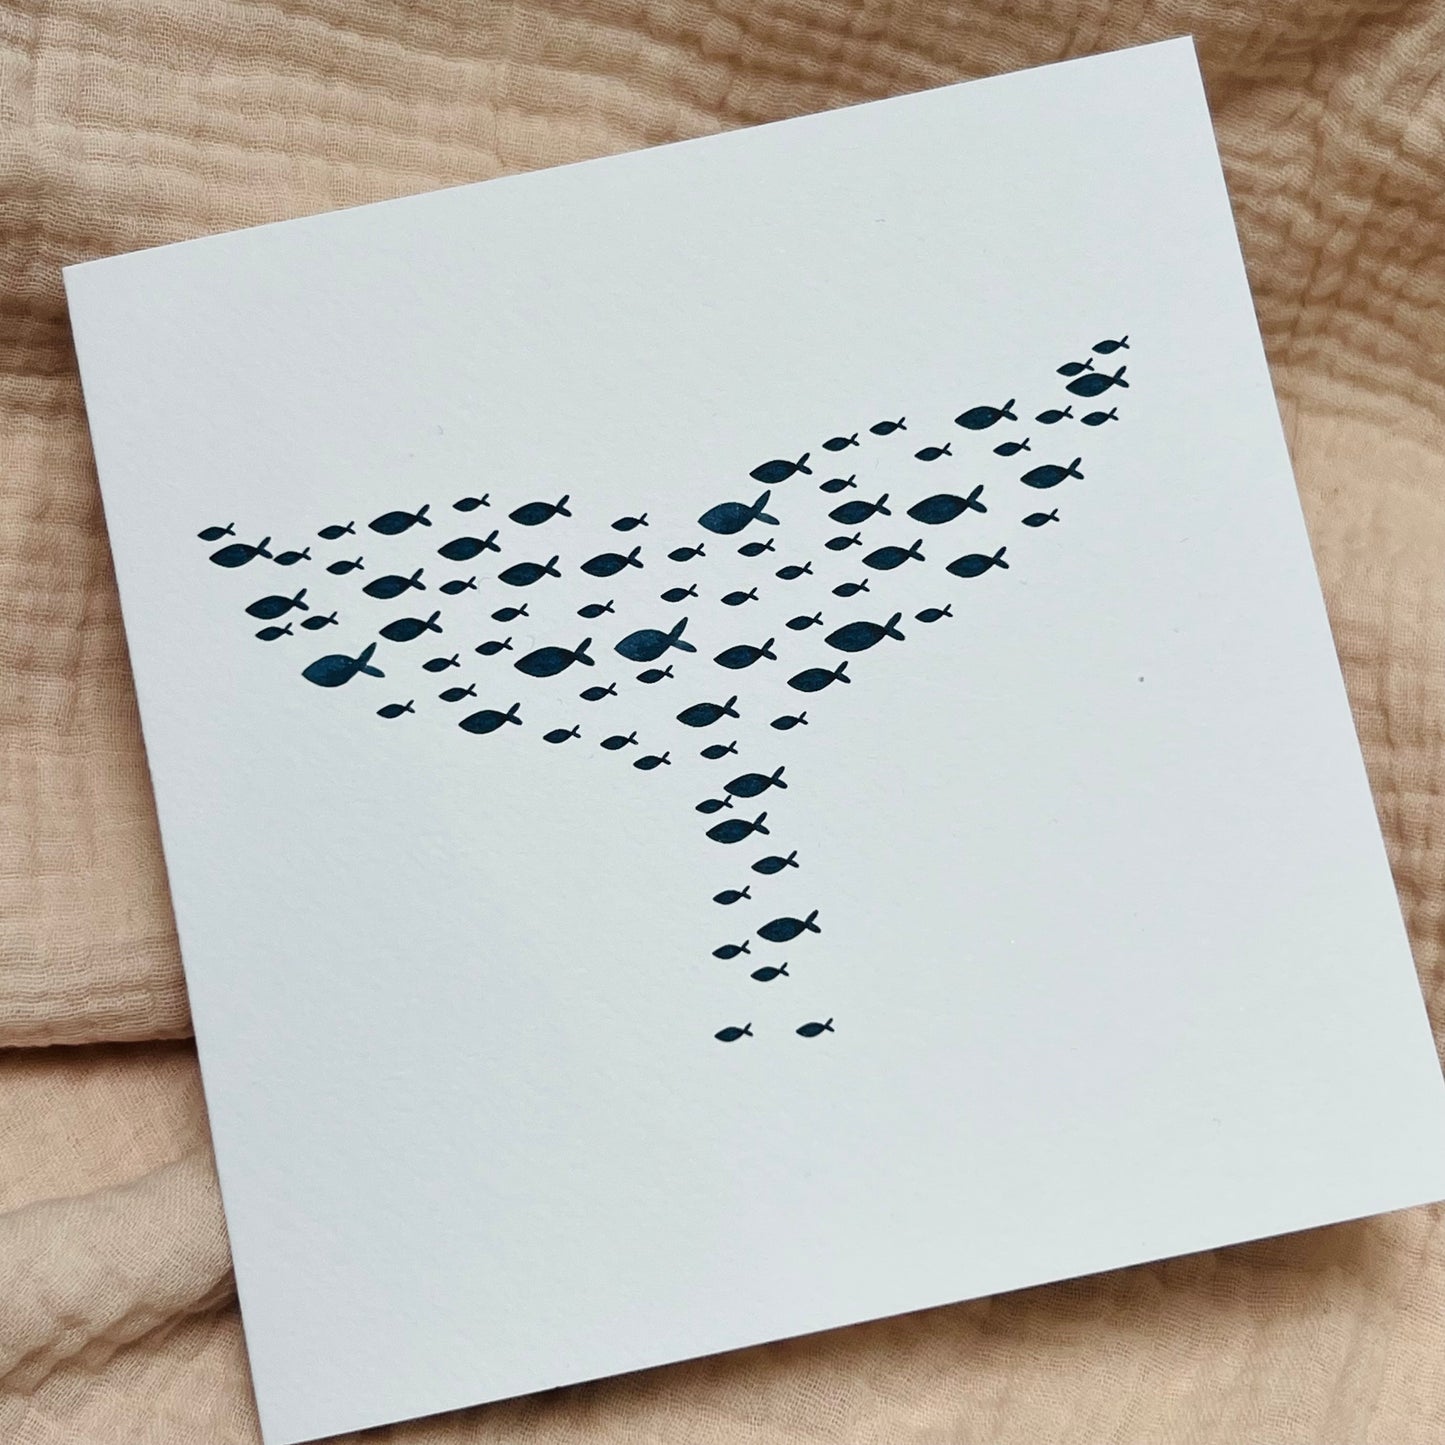 whale tail greetings card - shape of tail made up of little fish